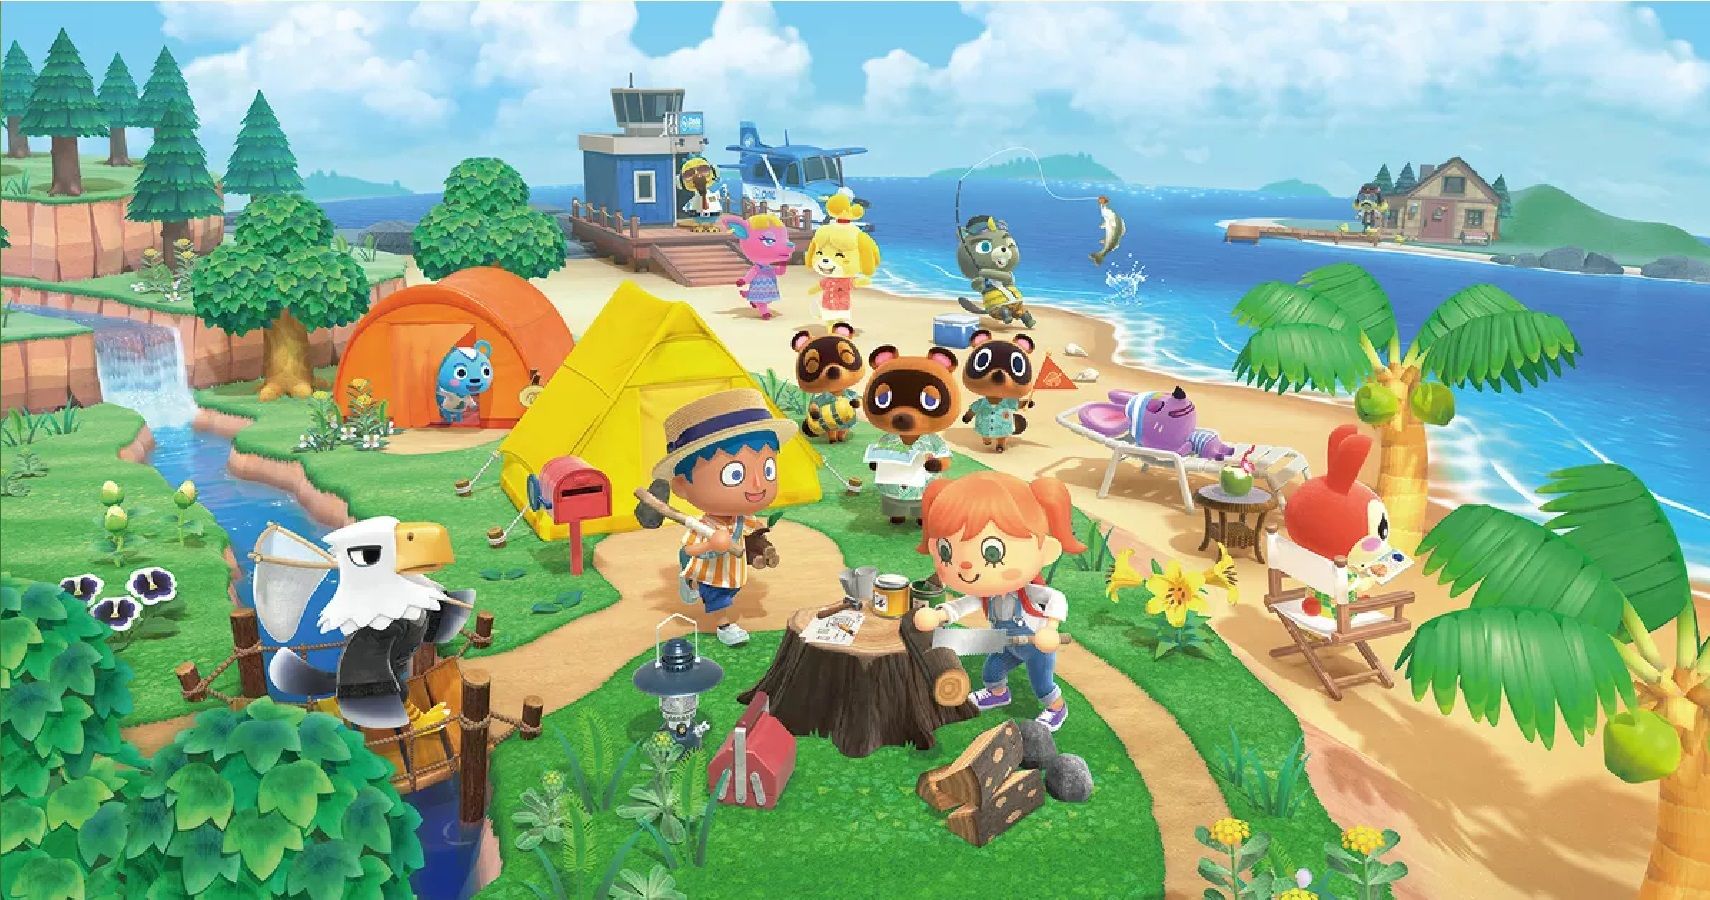 You Can Still Make A Fourth Level In Animal Crossing New Horizons